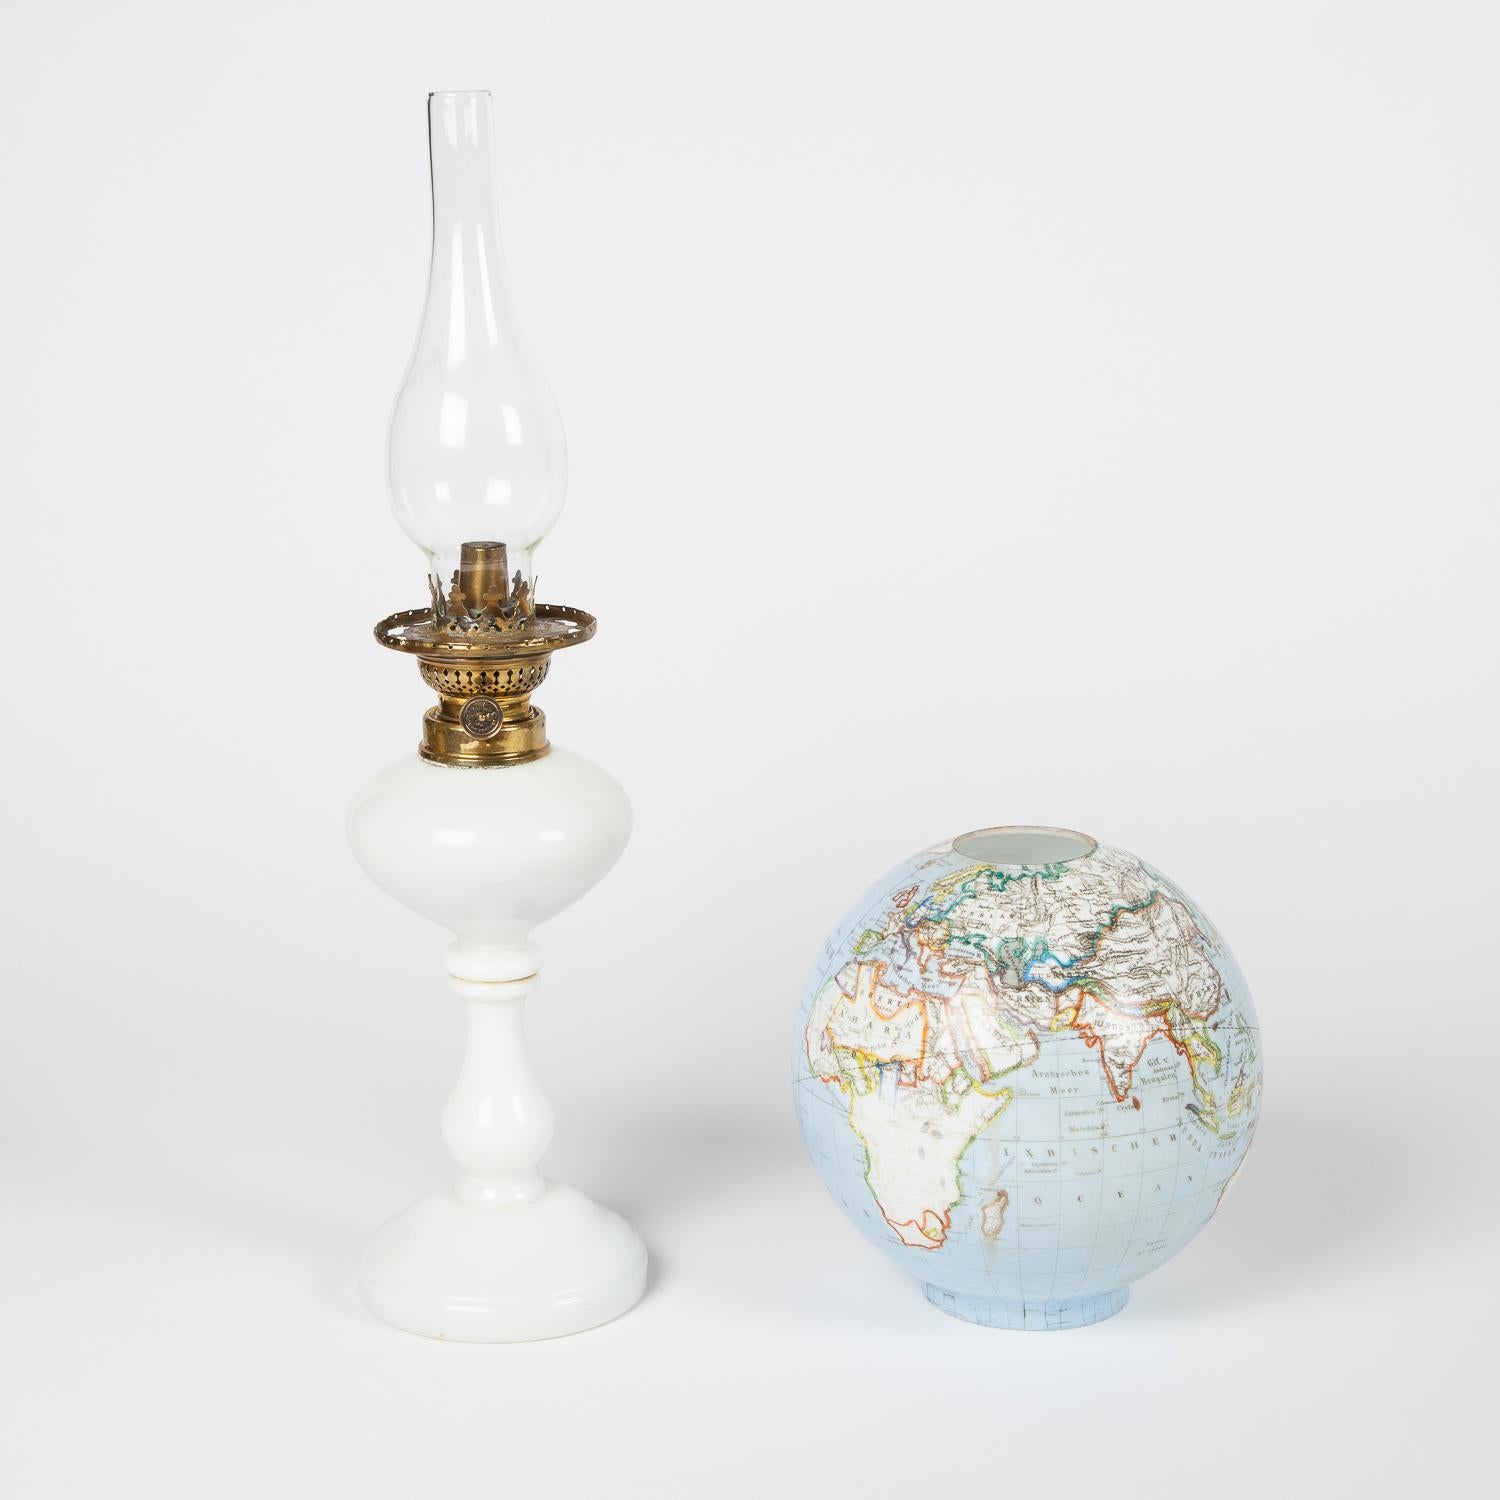 A late 19th century opalescent glass oil lamp with an illuminating globe shade, Bohemia, circa 1885.

Countries and Seas indicated in German.

Made by Stelzig, Kittel & Co.

Marked Patent No.34409. (Stelzig, Kittel & Co,